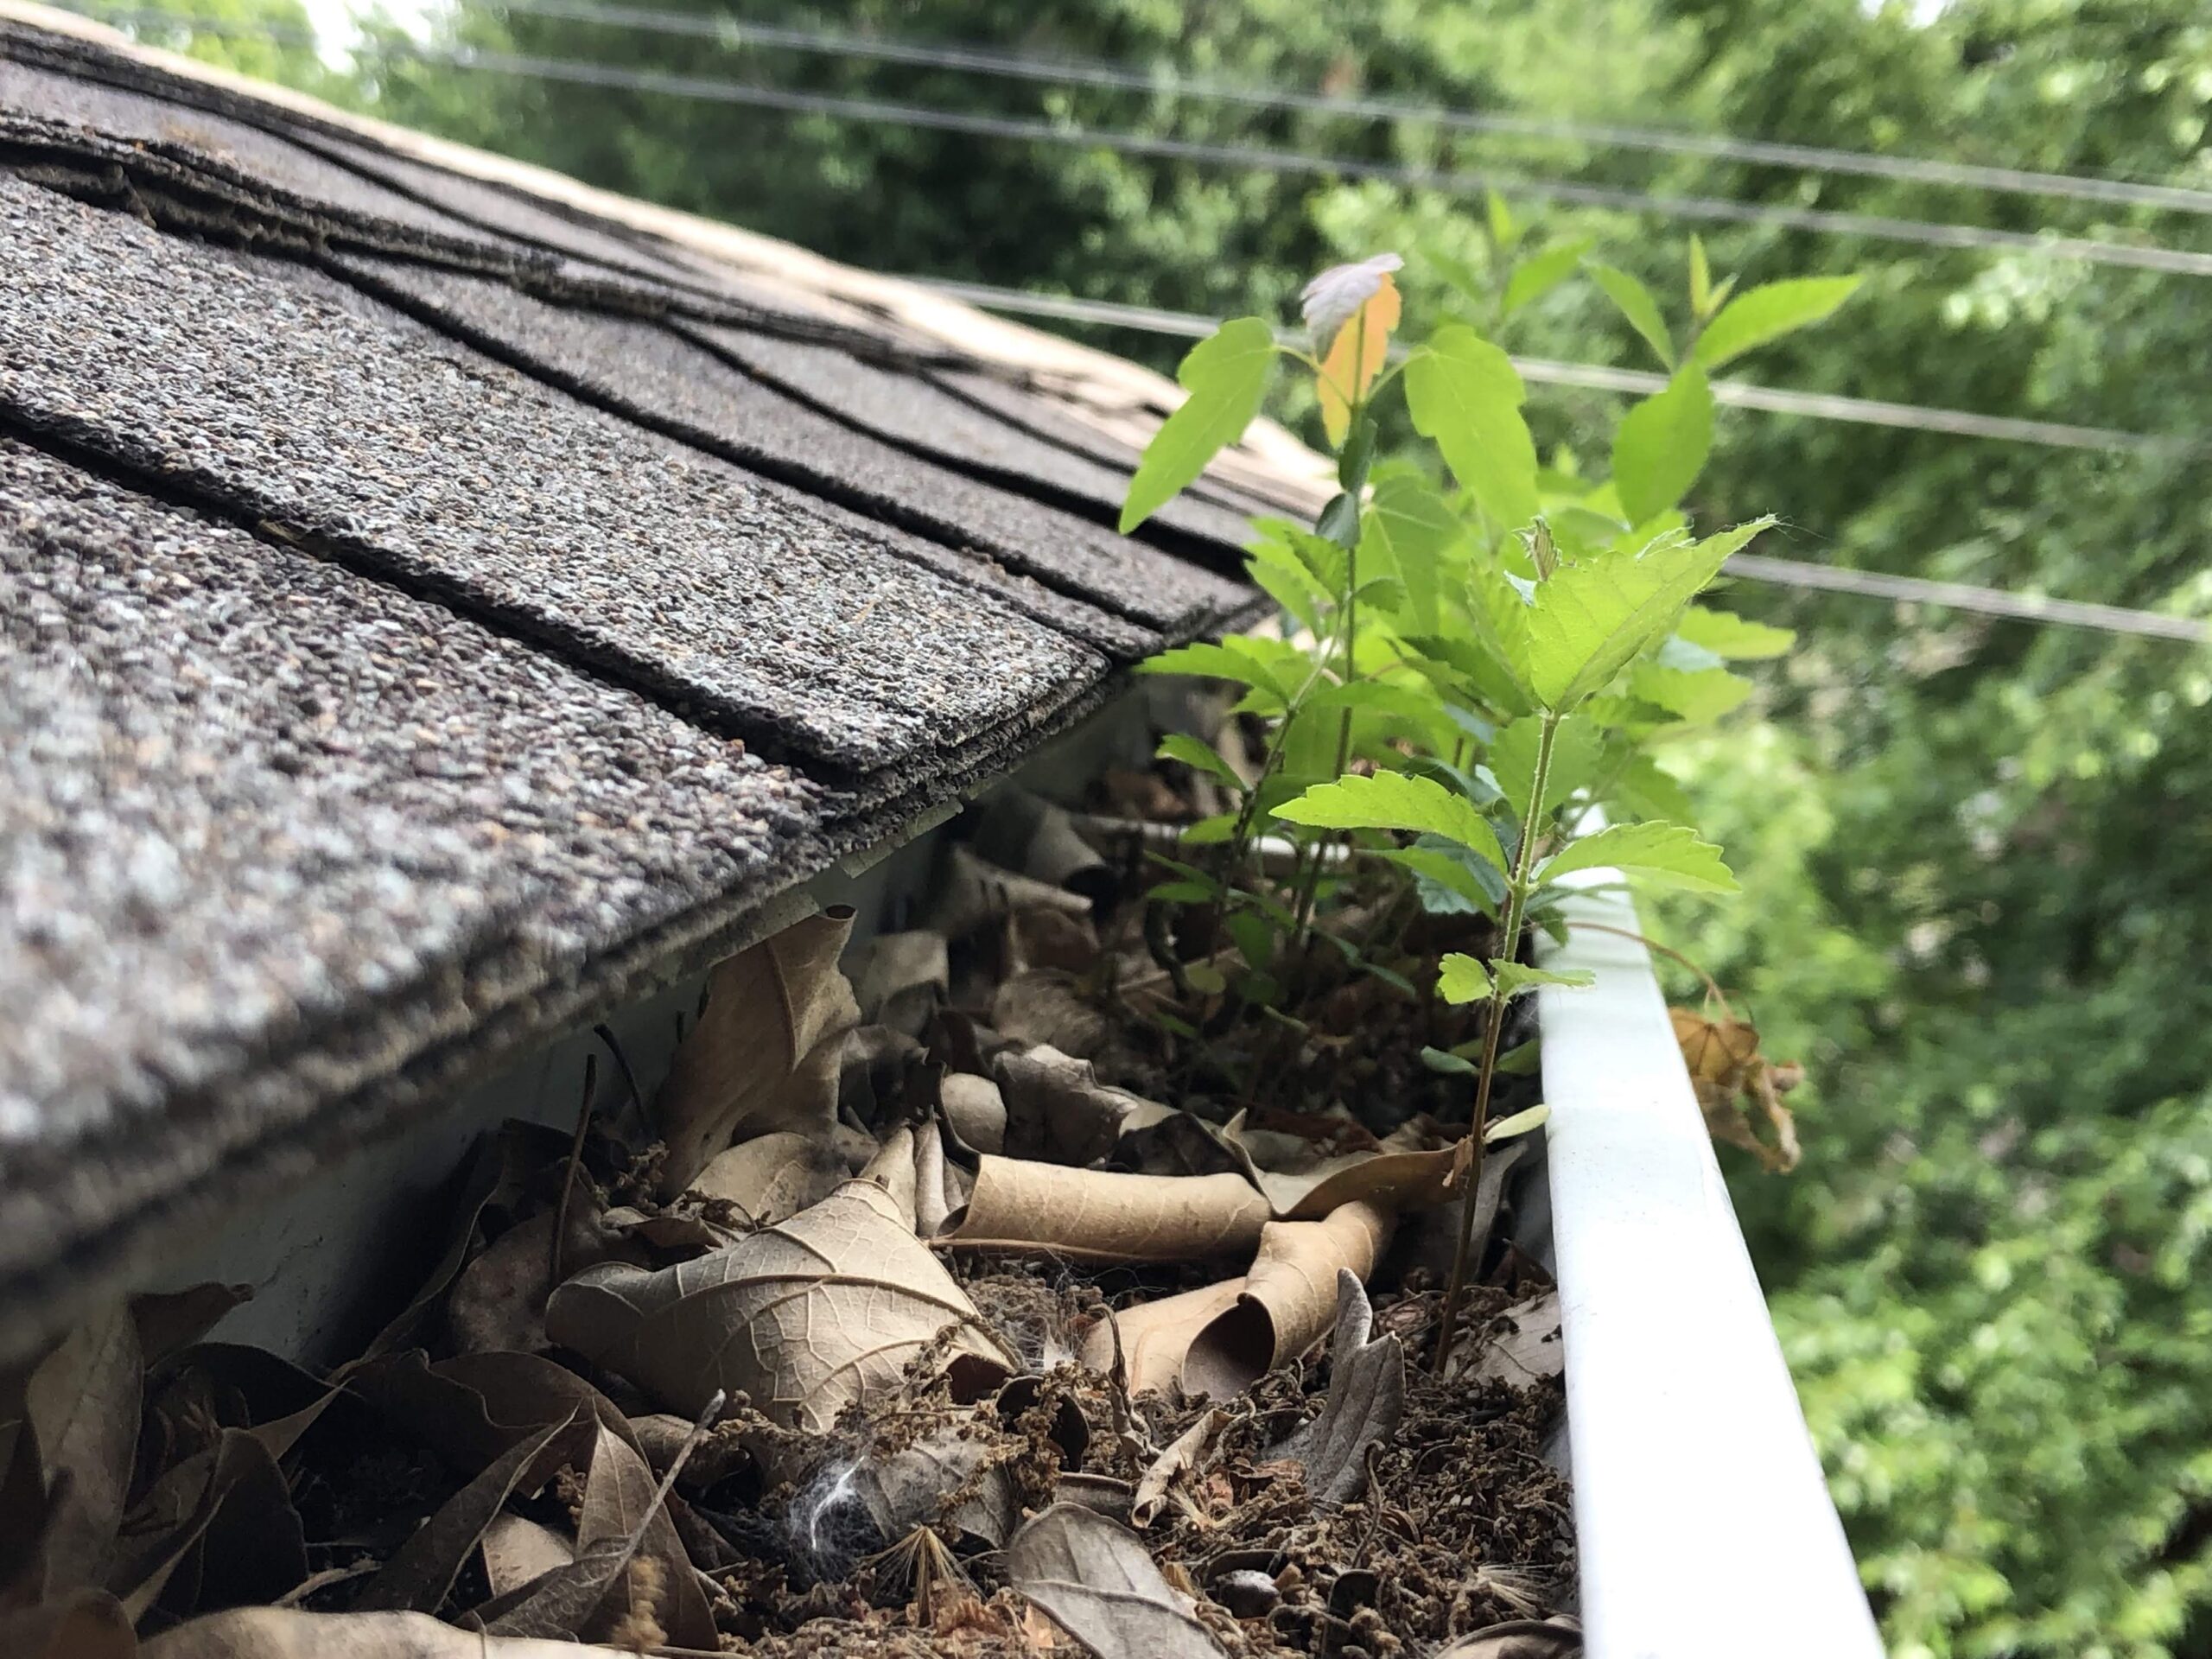 gutter tips in kansas city for example trees growing in gutters- how to avoid them